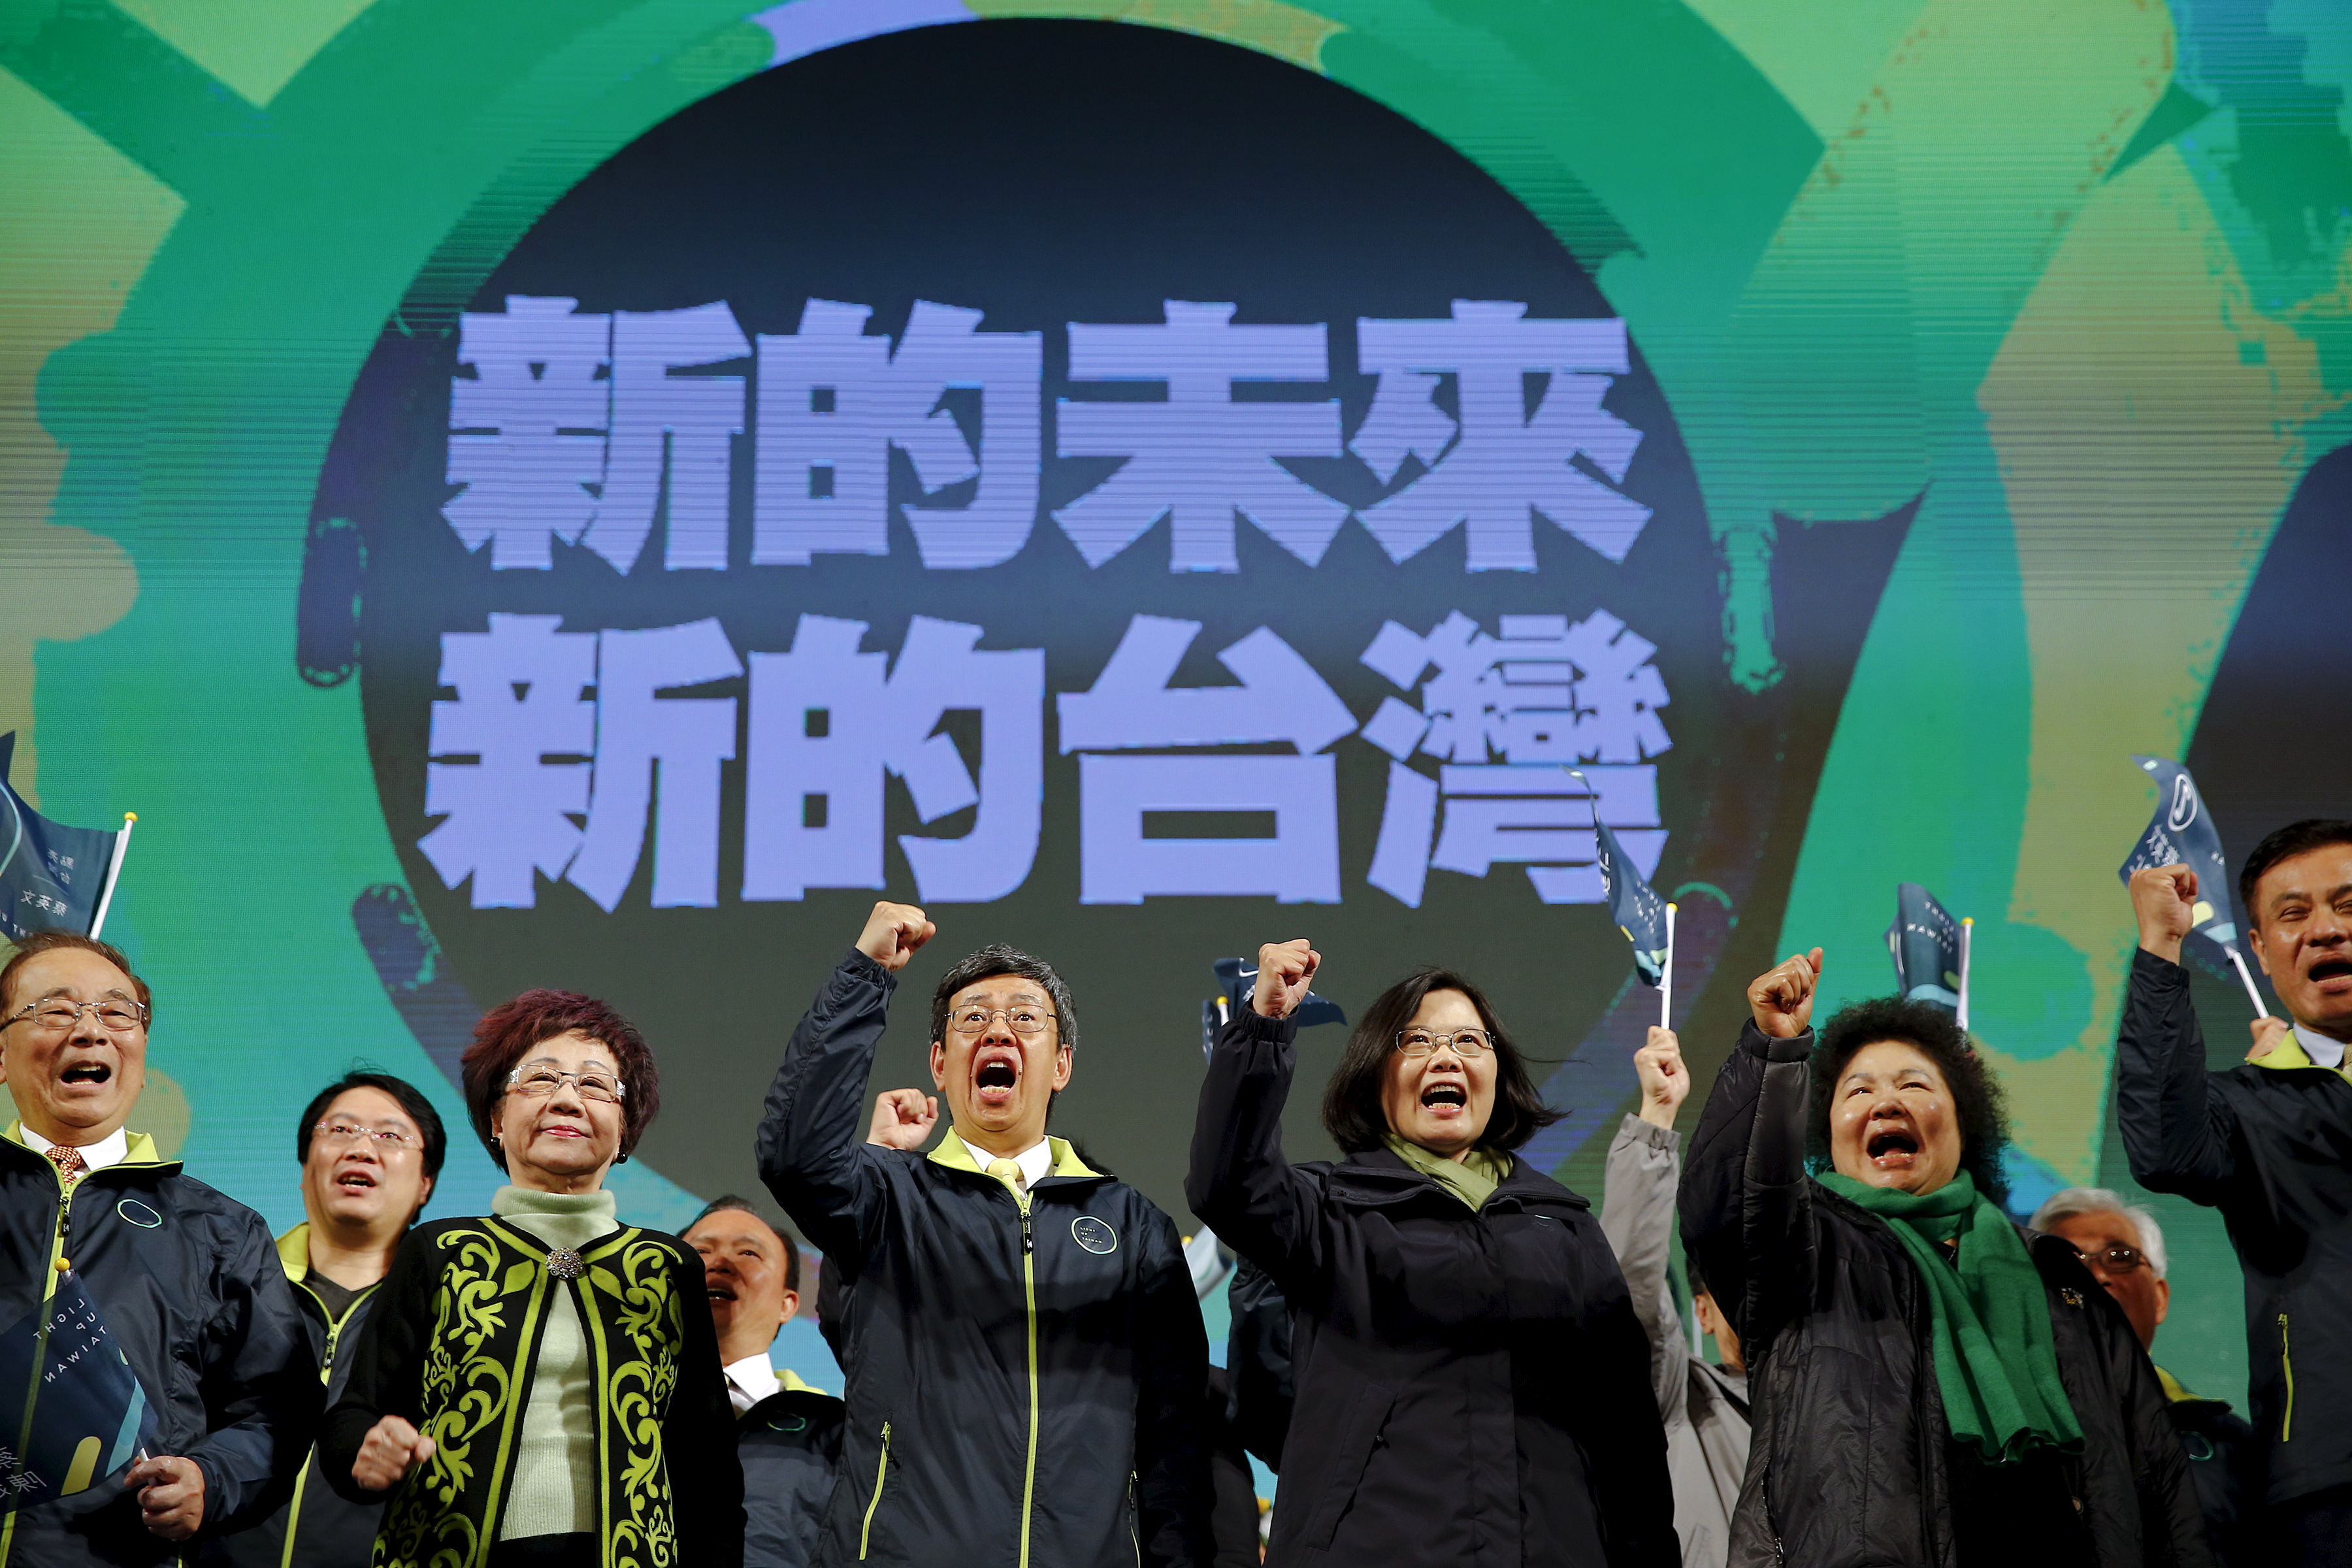 Democratic Progressive Party chairperson and presidential candidate Tsai Ing-wen, third from right, celebrates her election victory with other party members at the DPP's headquarters in Taipei on Jan. 16, 2016 (Damir Sagolj—Reuters)